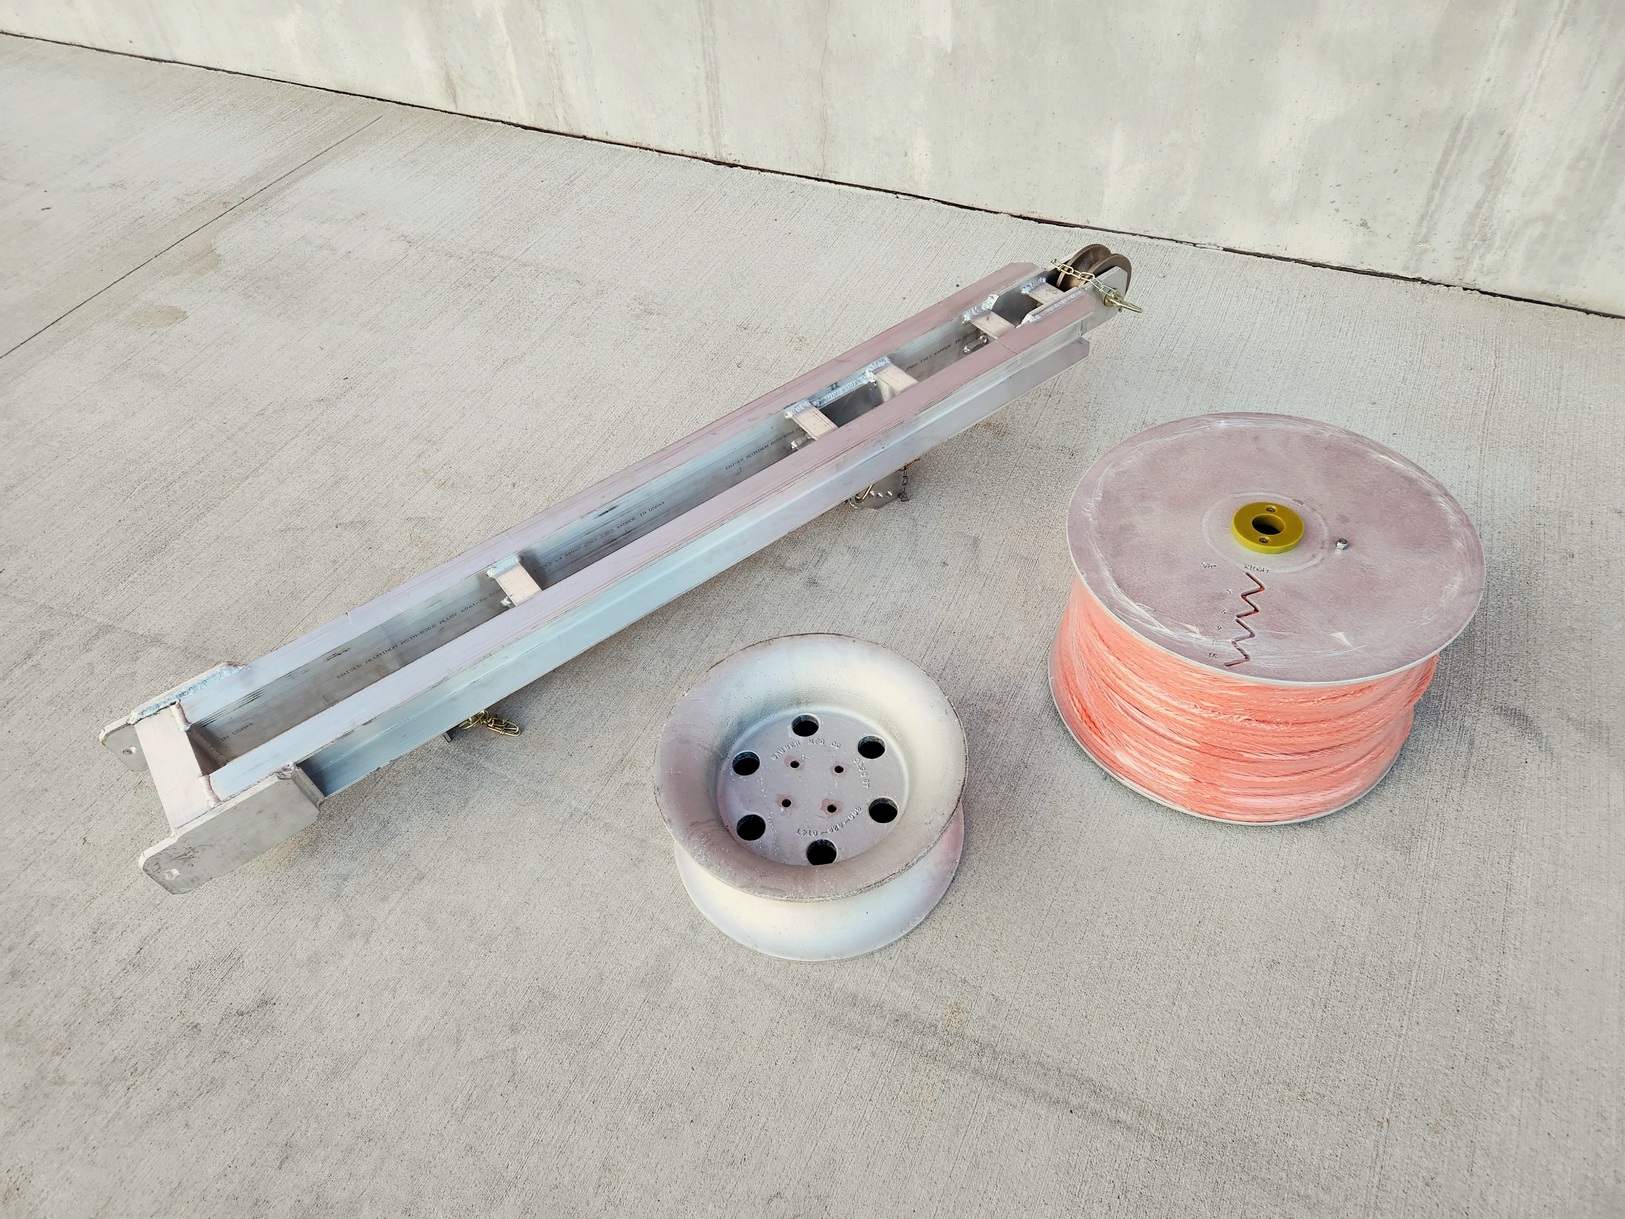 Model 1570-B Puller Underground accessories shown from above on a concrete pad with a concrete foundation in the background. The accessories are a jib arm, 5000lbs capacity capstan and a aluminum cassette with orange underground rope.